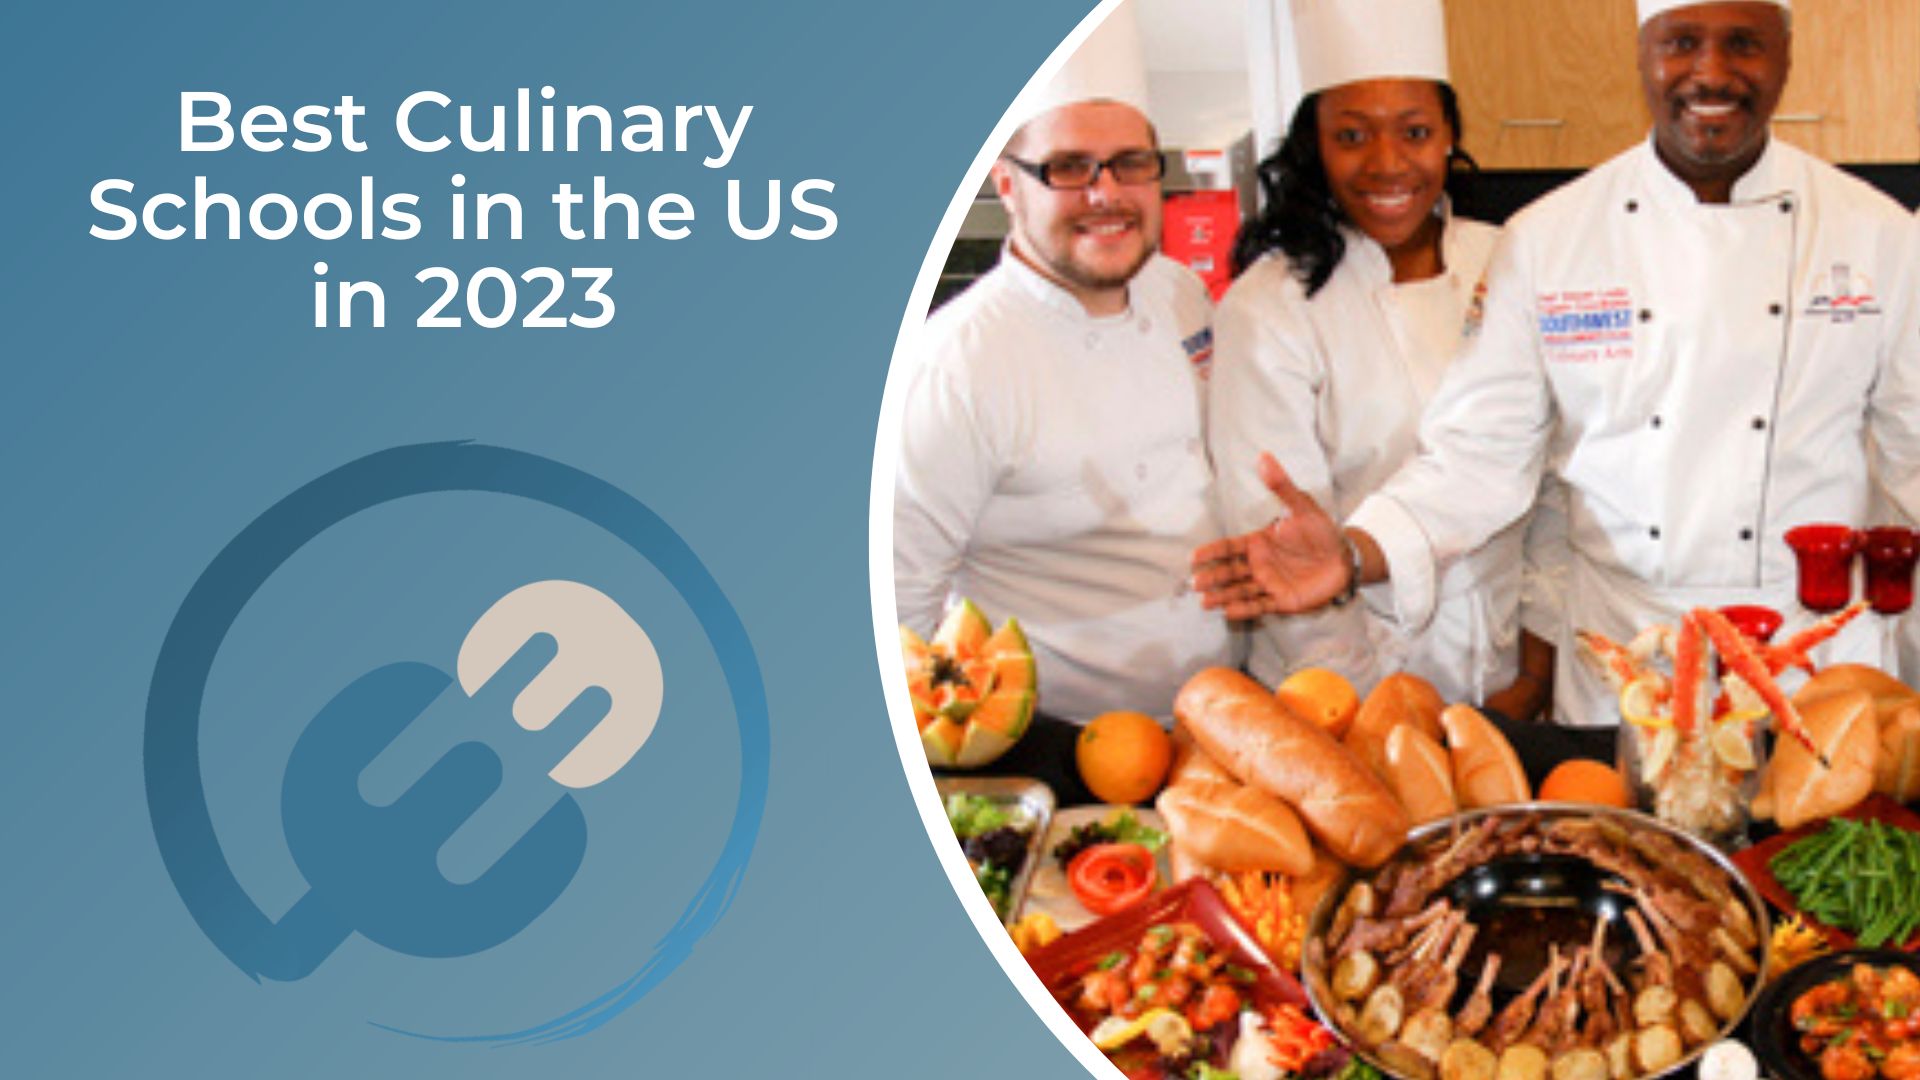 Best Culinary Schools in the US in 2023